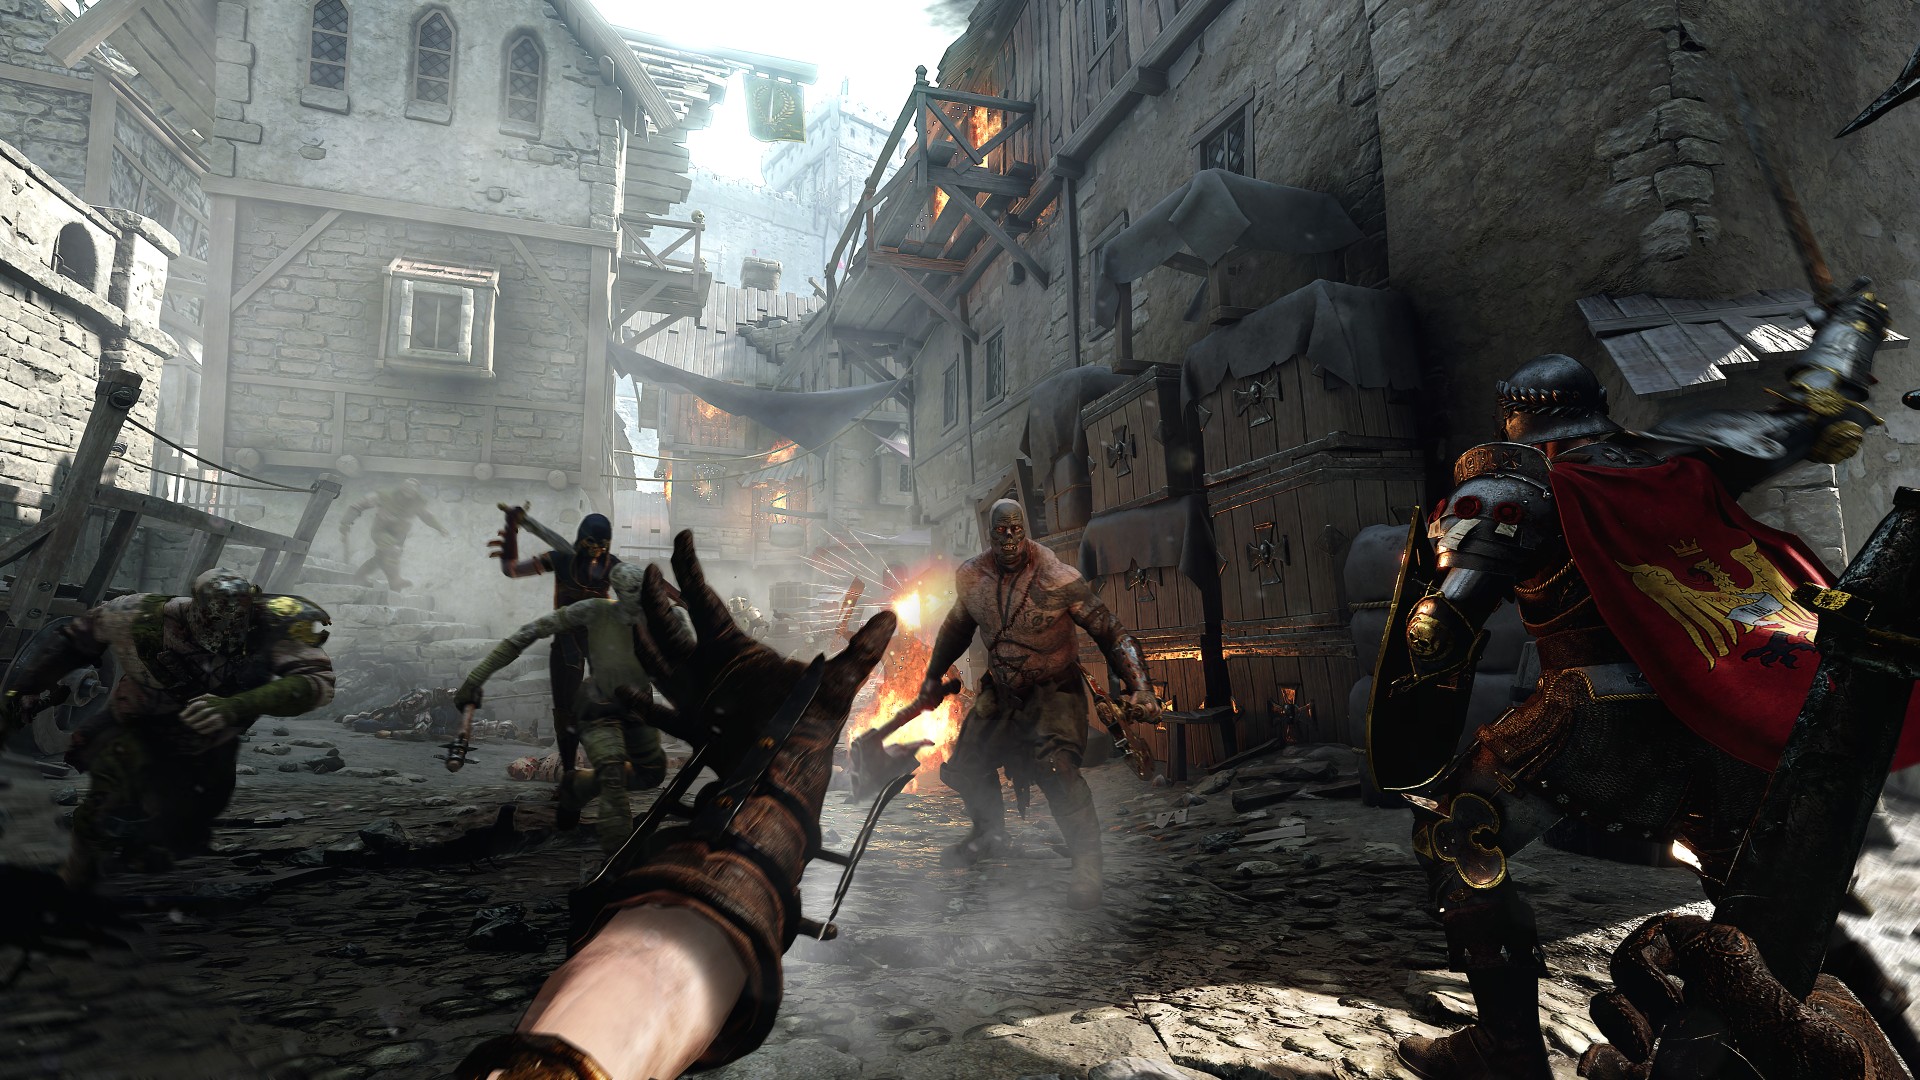 How Developer Fatshark Created Their Passion Project in Vermintide 2